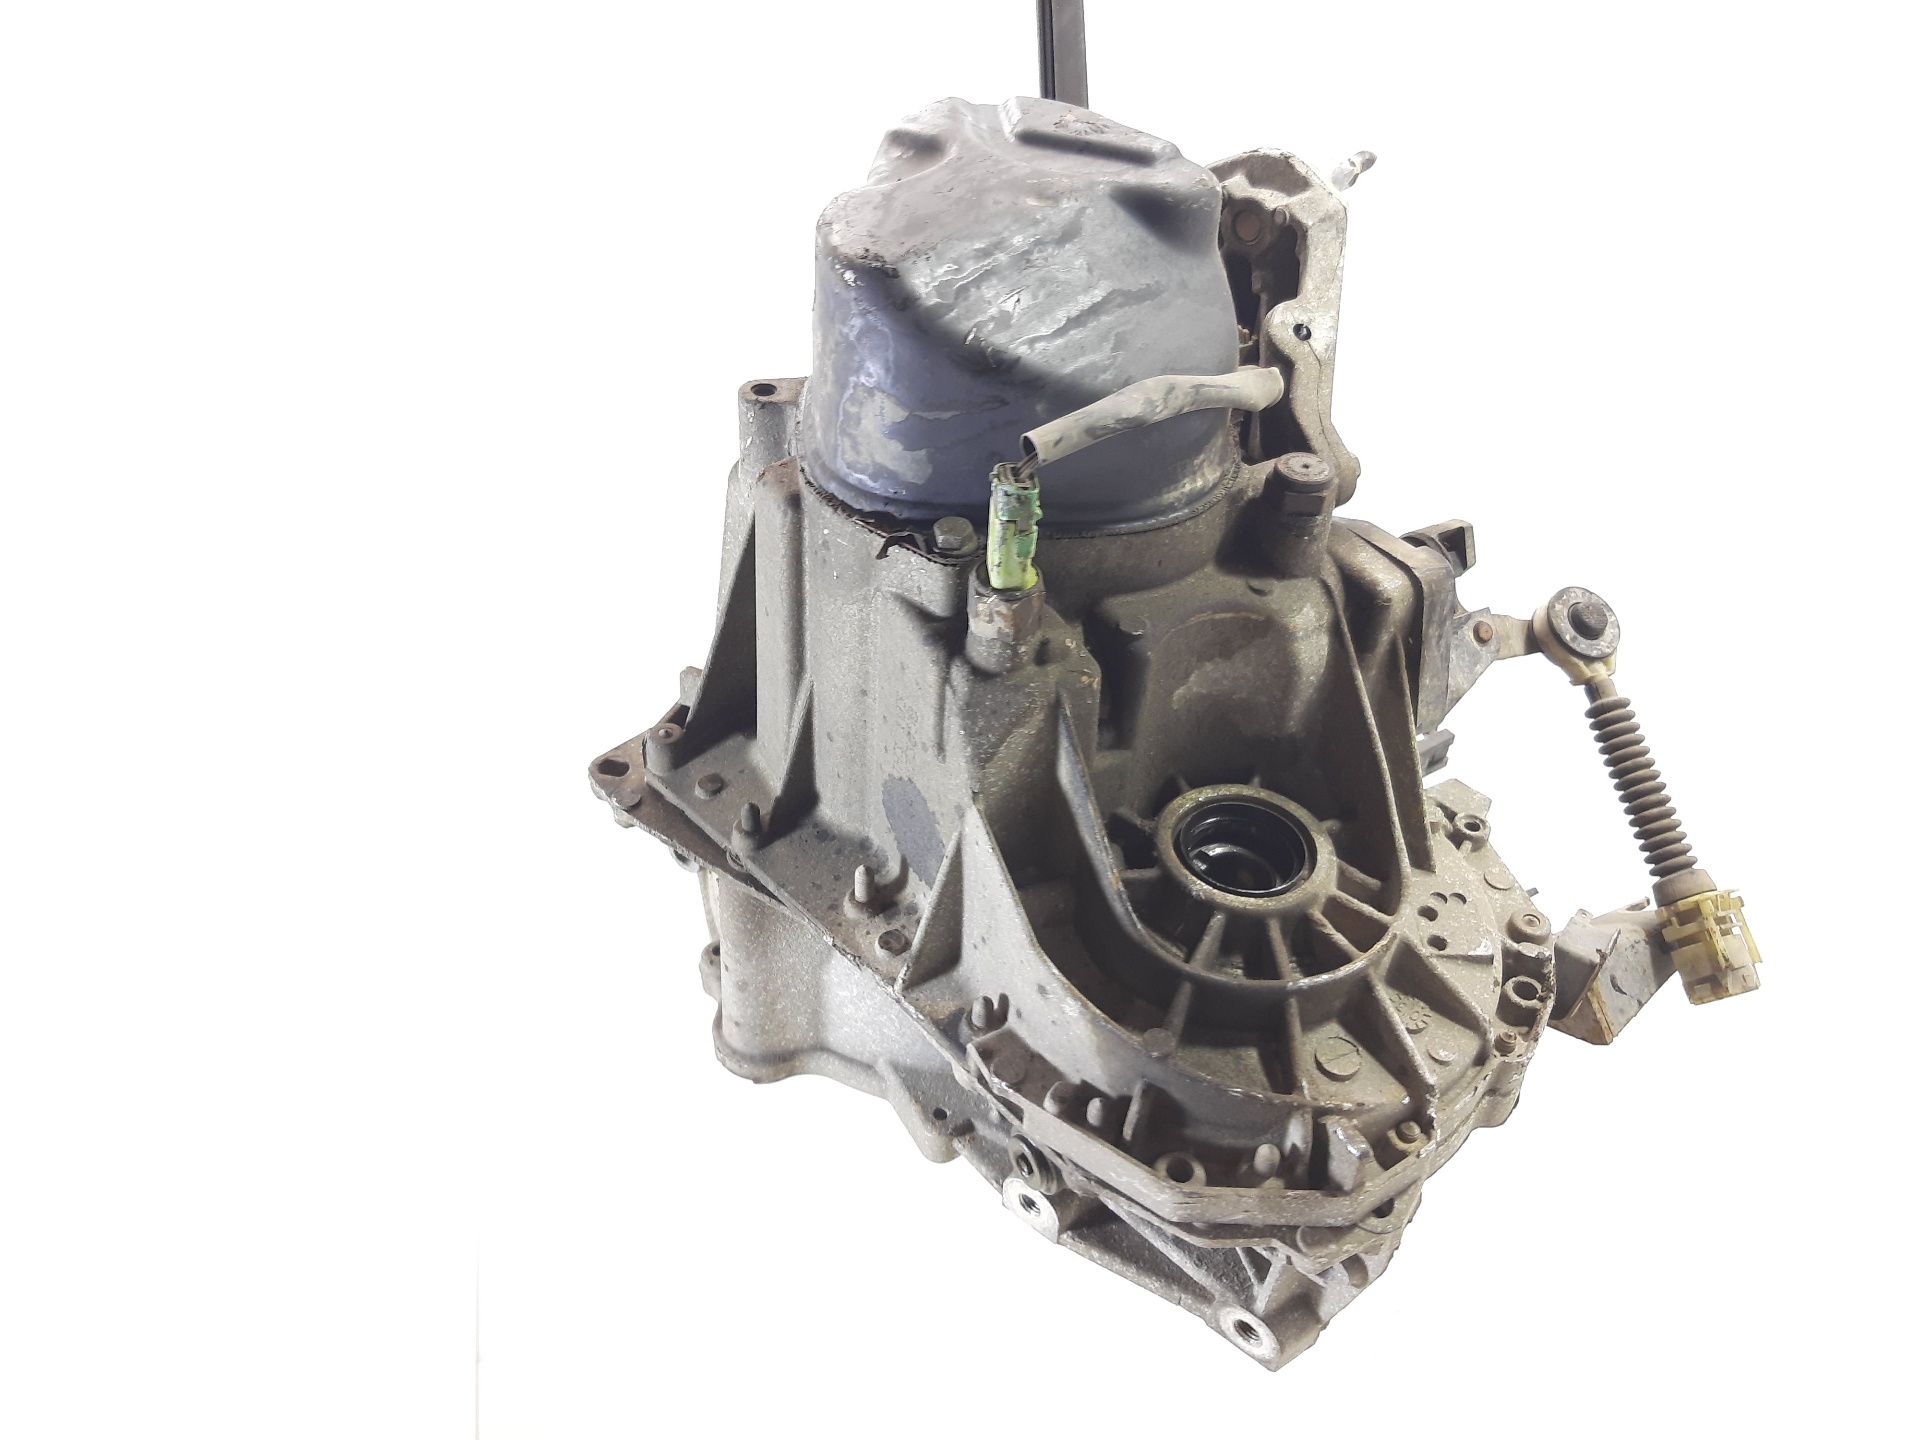 NISSAN Micra K12 (2002-2010) Gearbox JH3103, 5VELOCIDADES 23031854